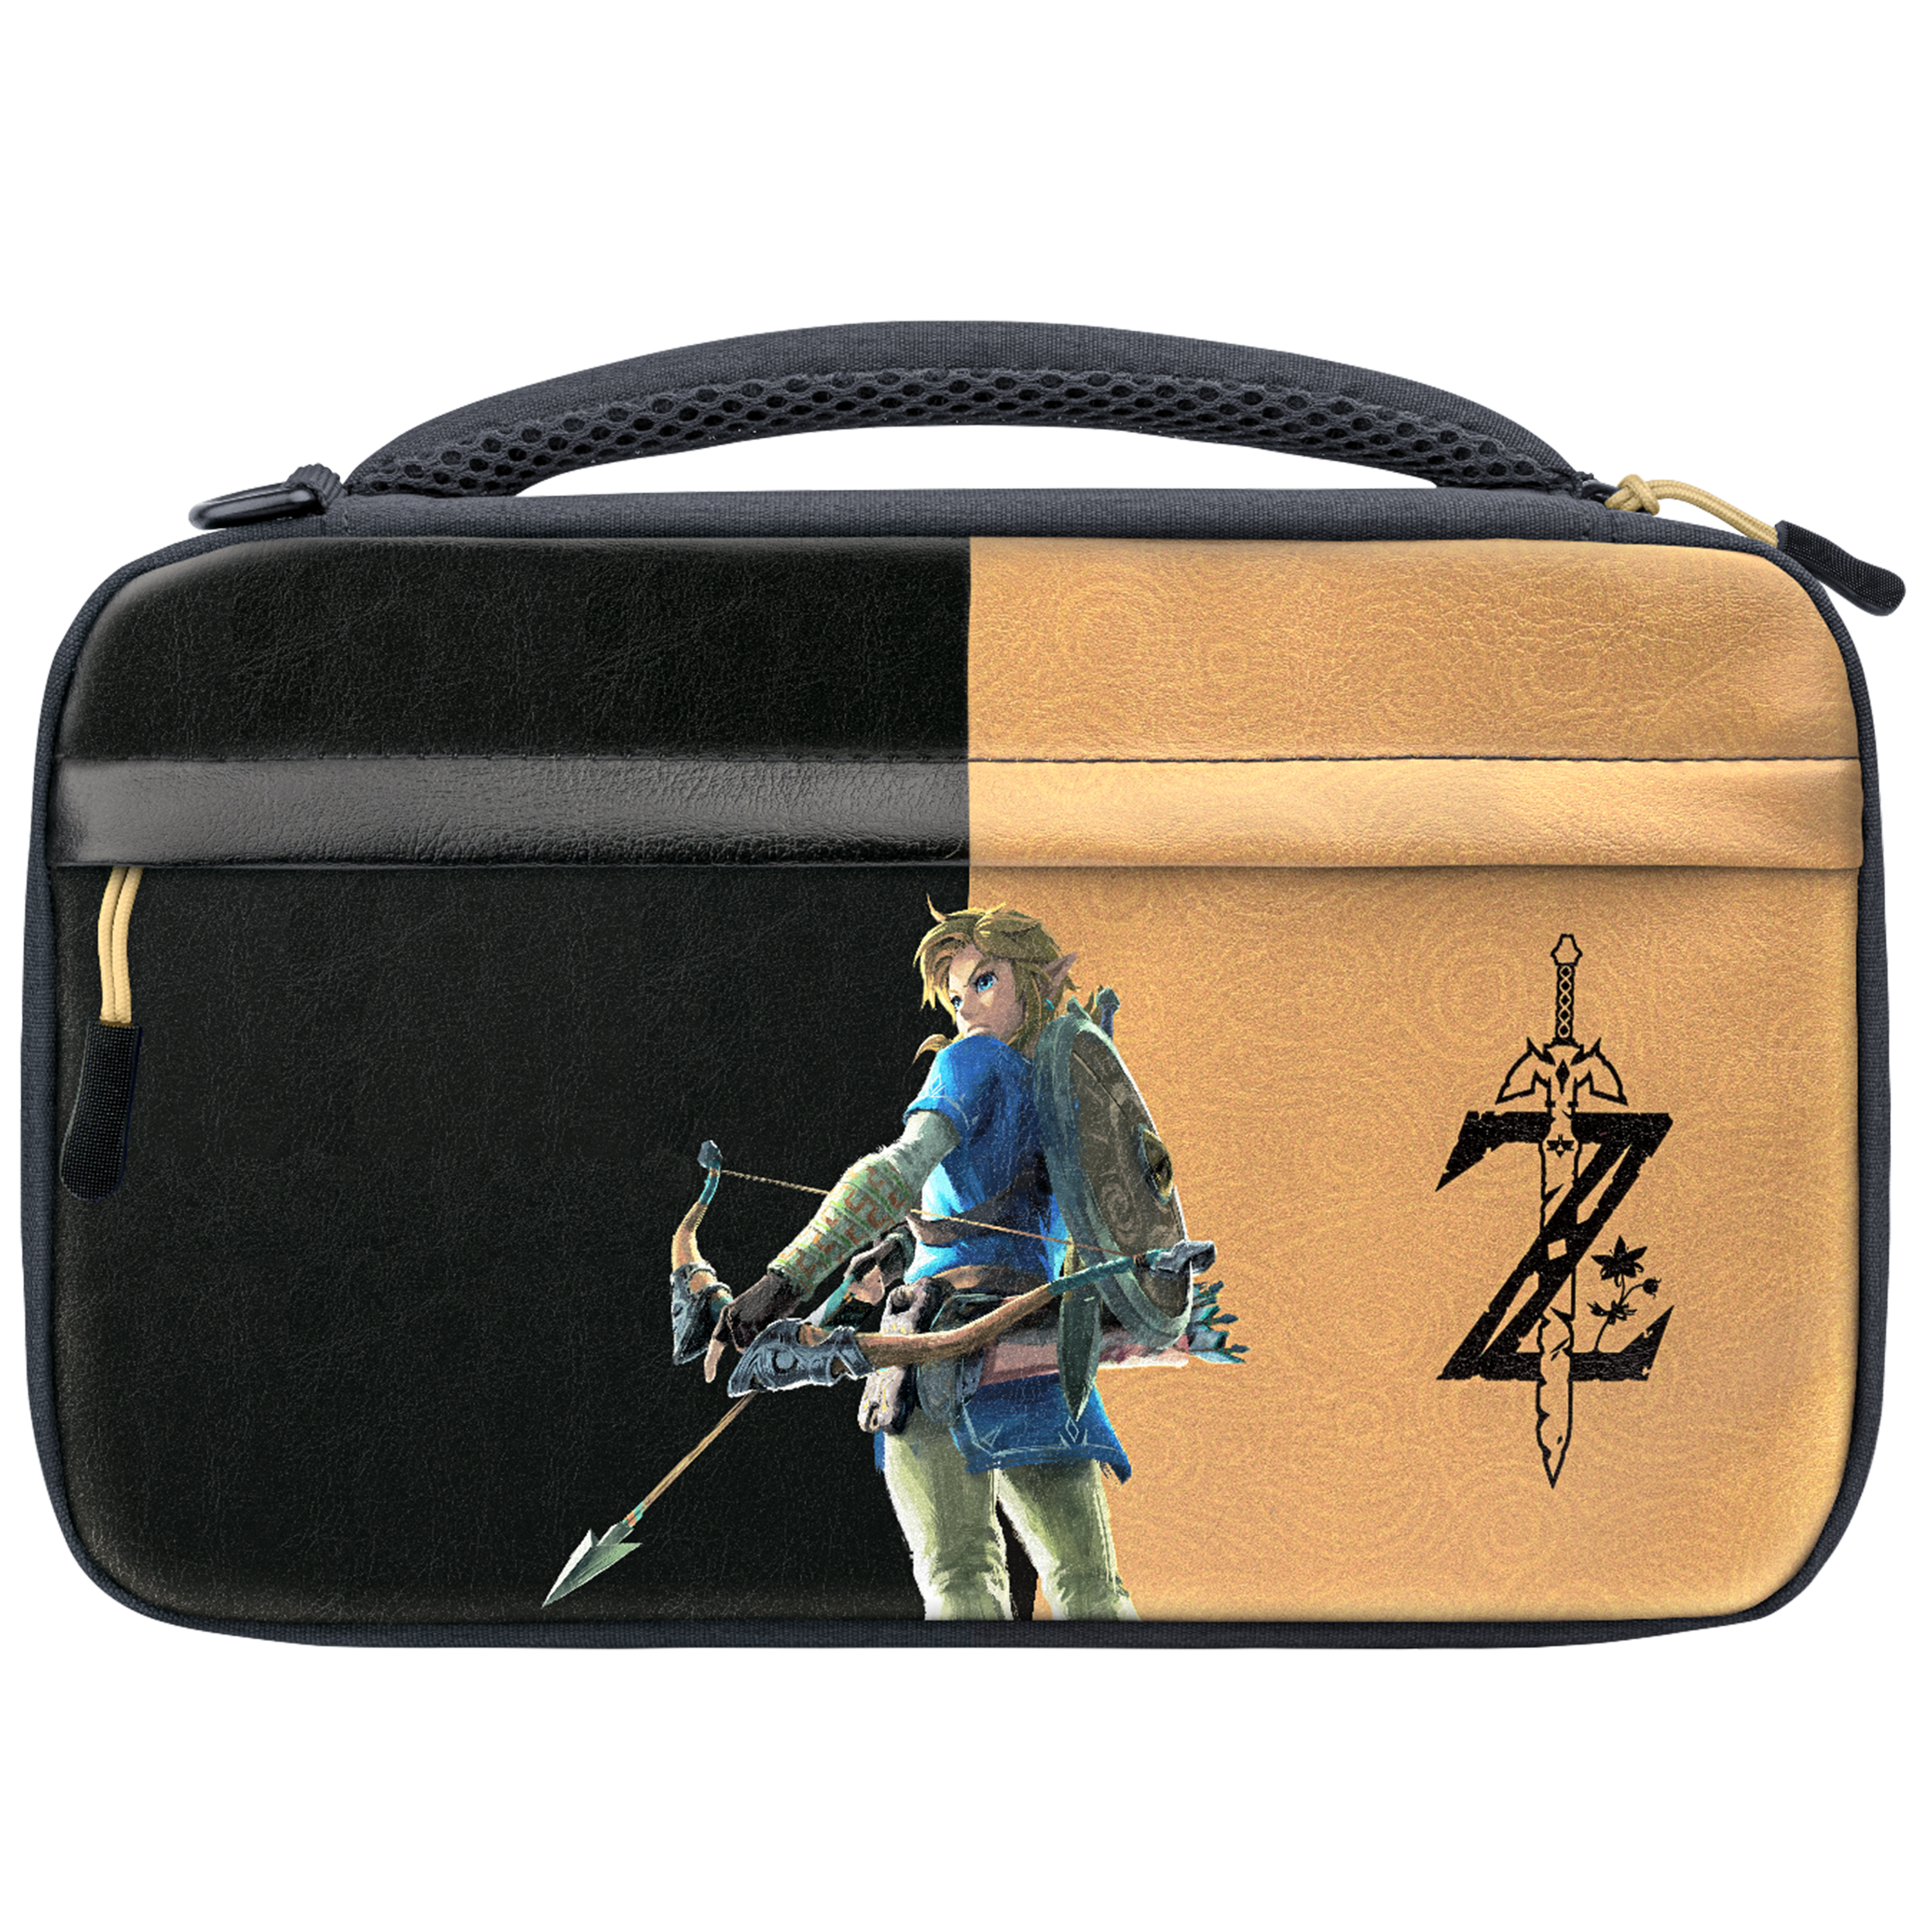 Nintendo Switch Zelda Breath of the Wild Messenger Case by PDP